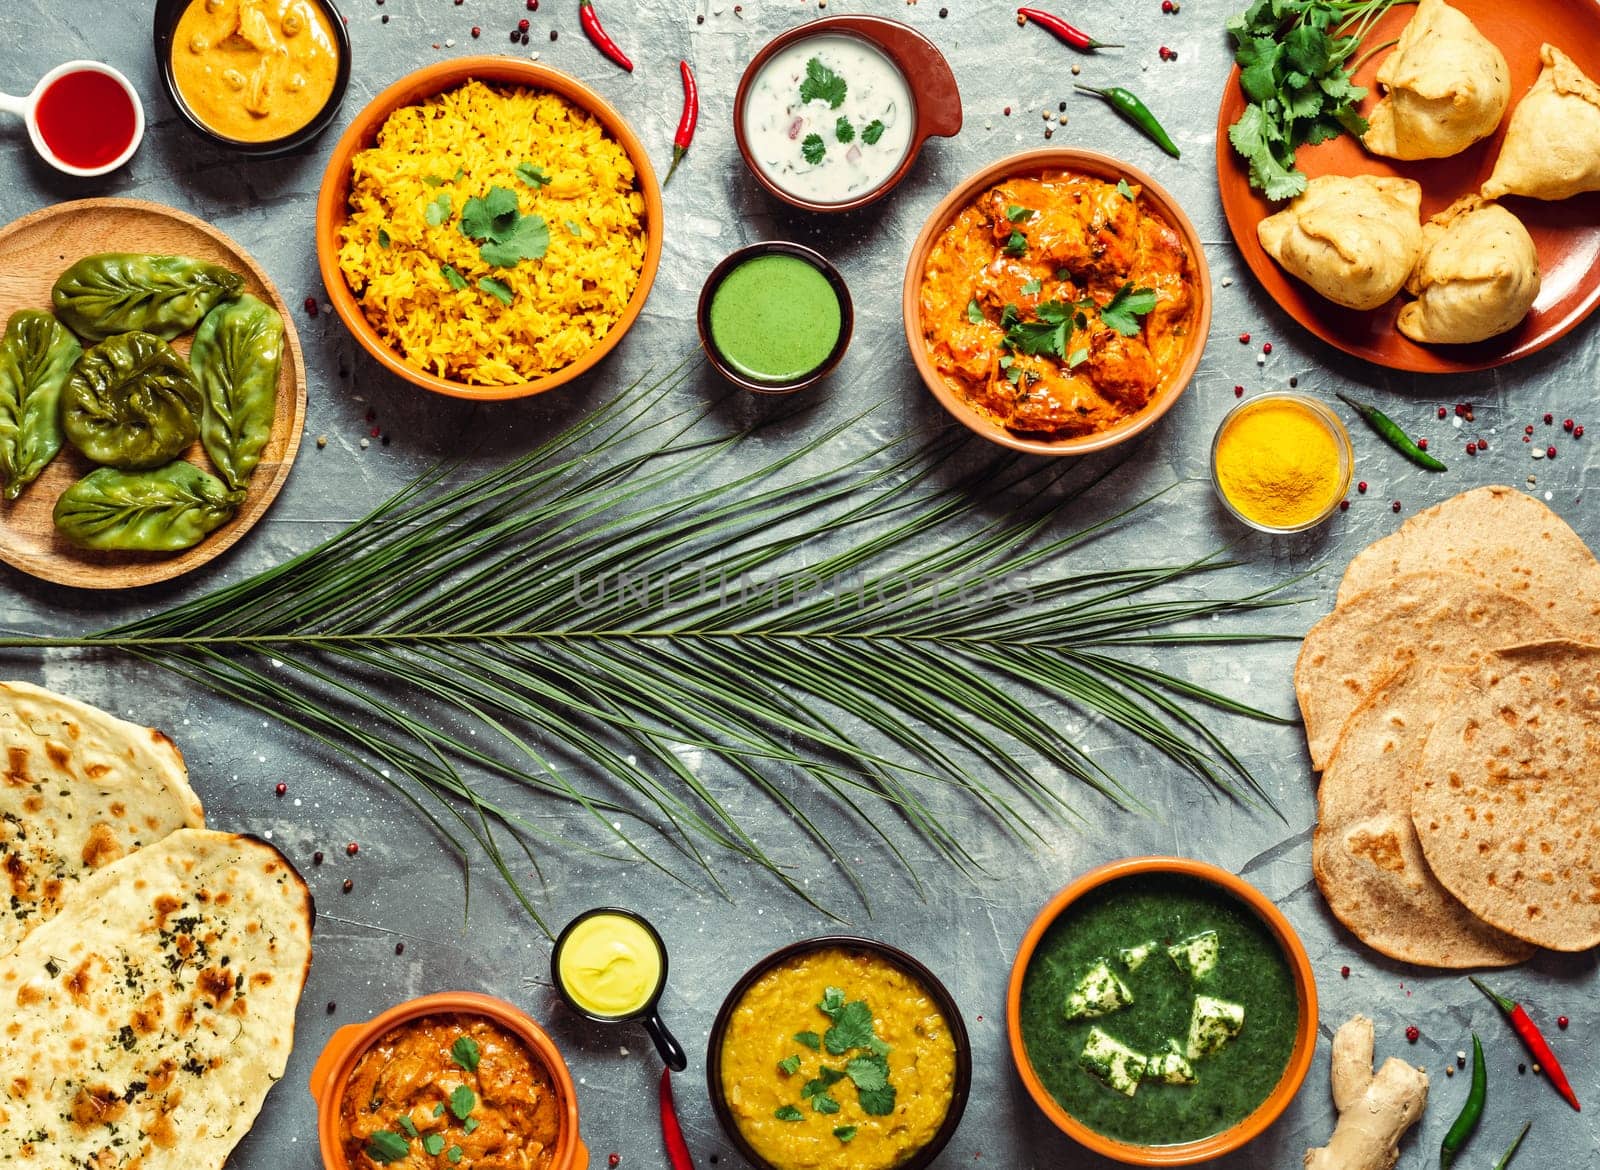 Indian cuisine dishes: tikka masala, dal, paneer, samosa, chapati, chutney, spices. Indian food on gray background. Assortment indian meal with copy space for text in center. Top view or flat lay.